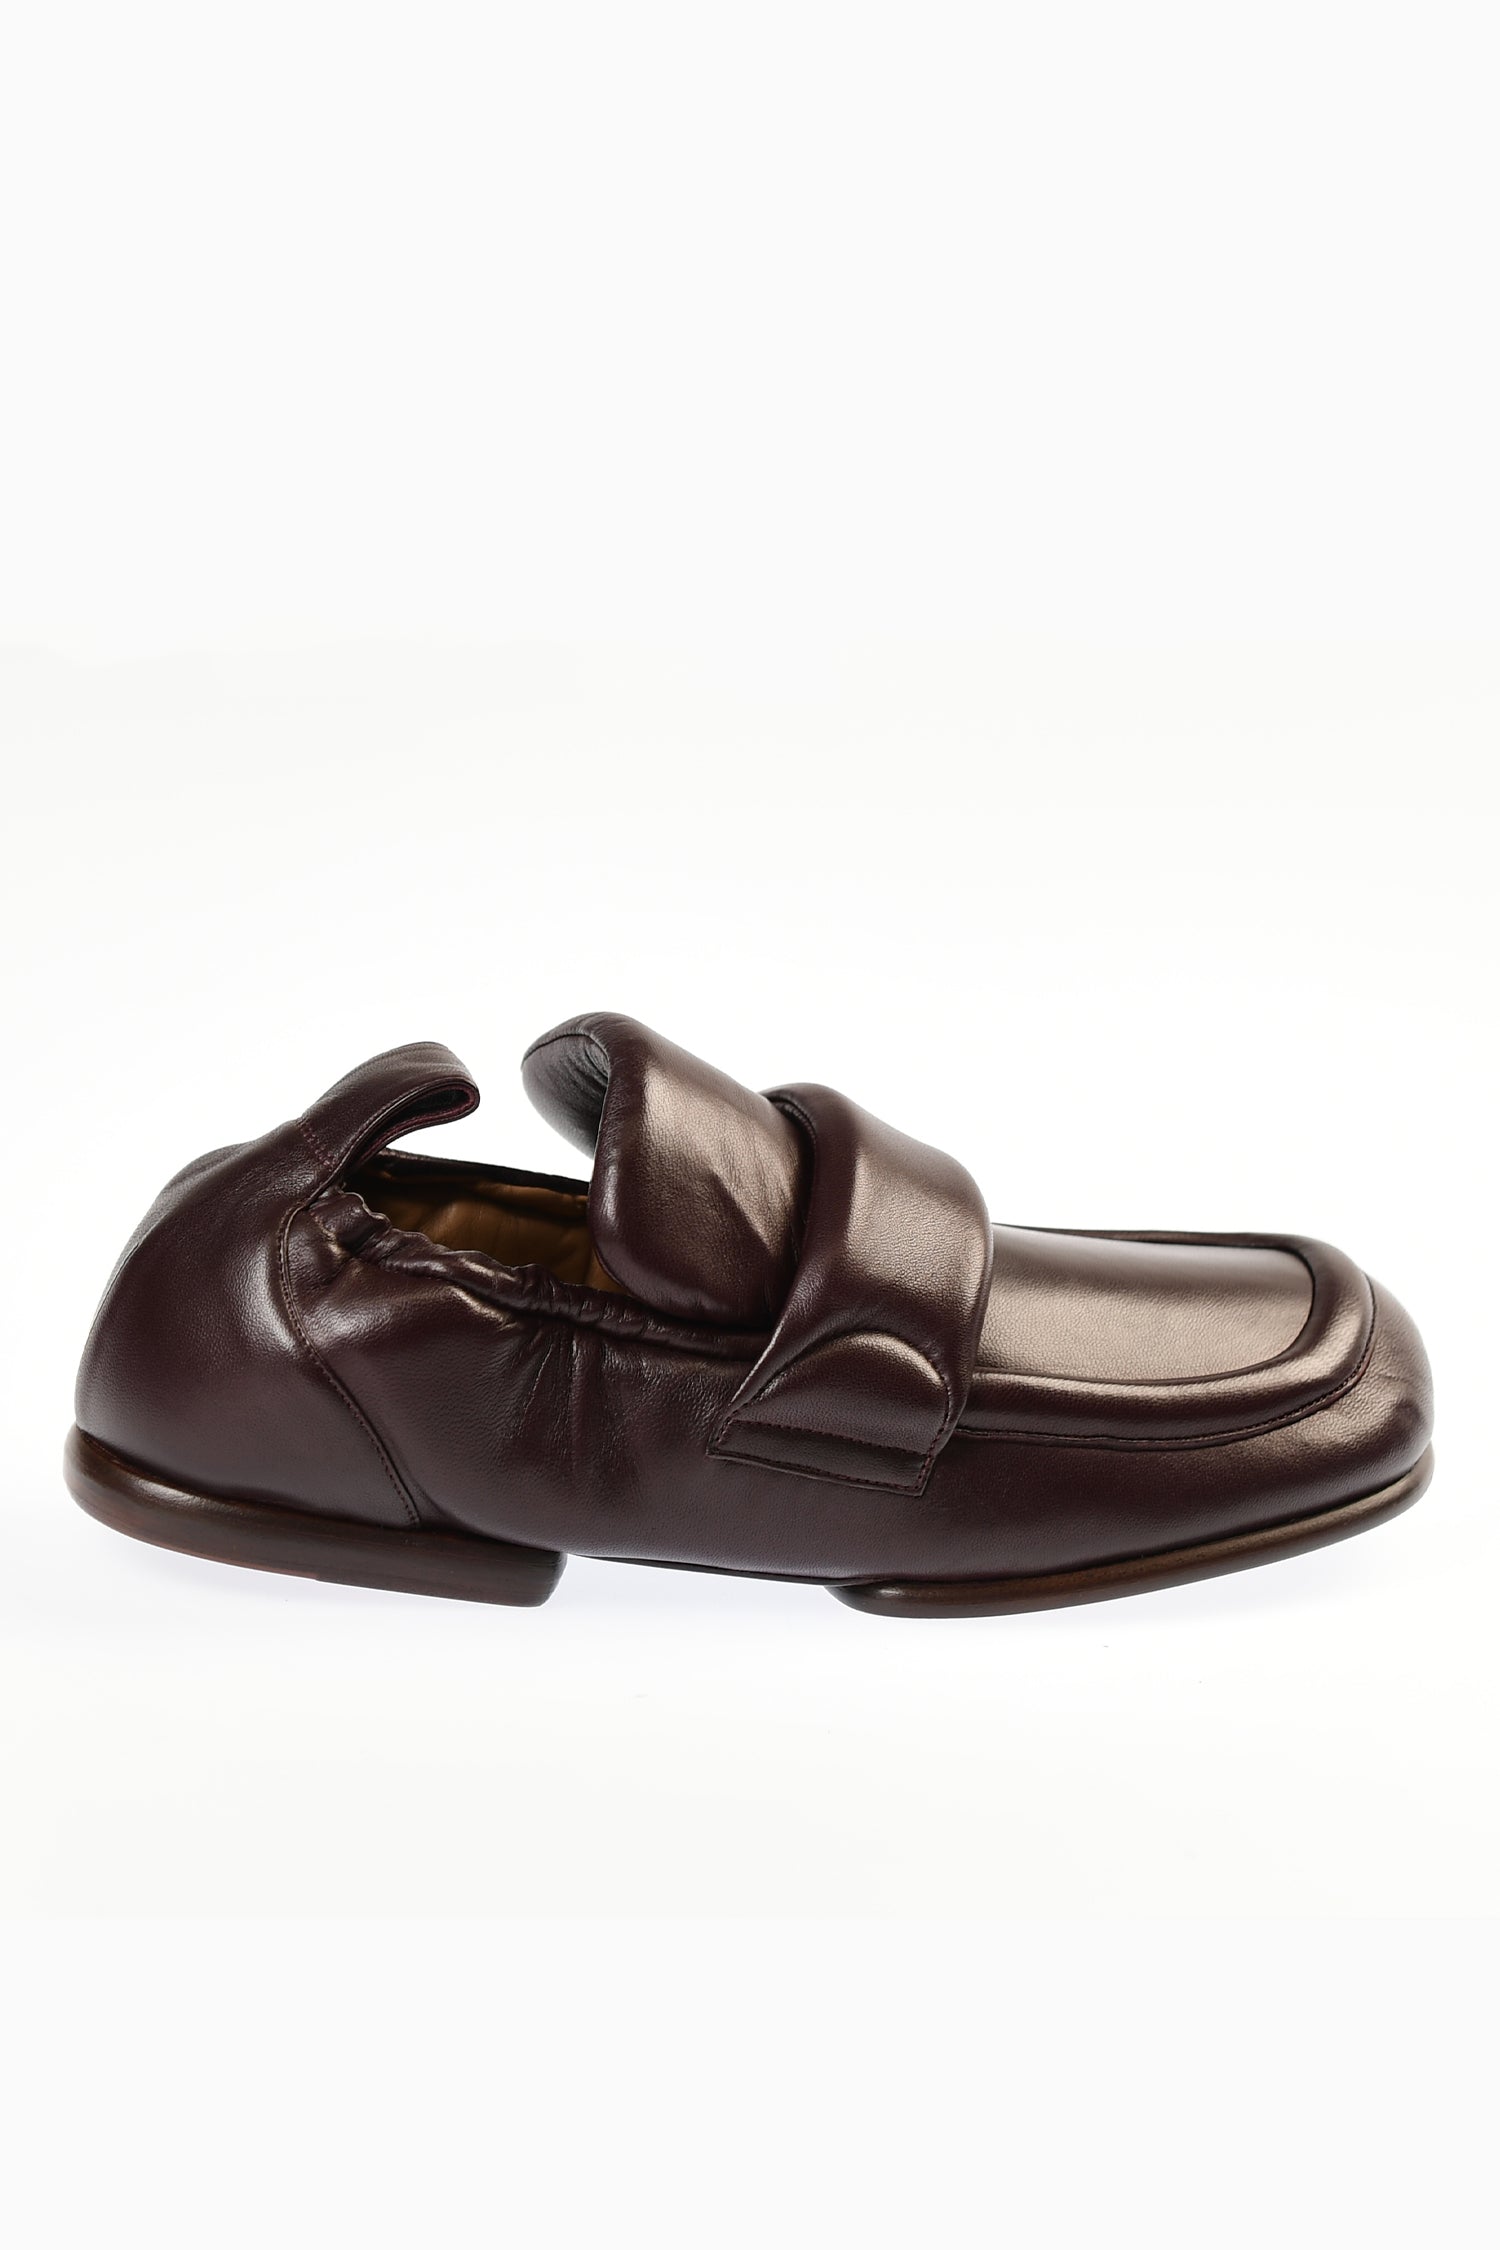 DRIES MENS LOAFER IN CHOCO, AW22-23